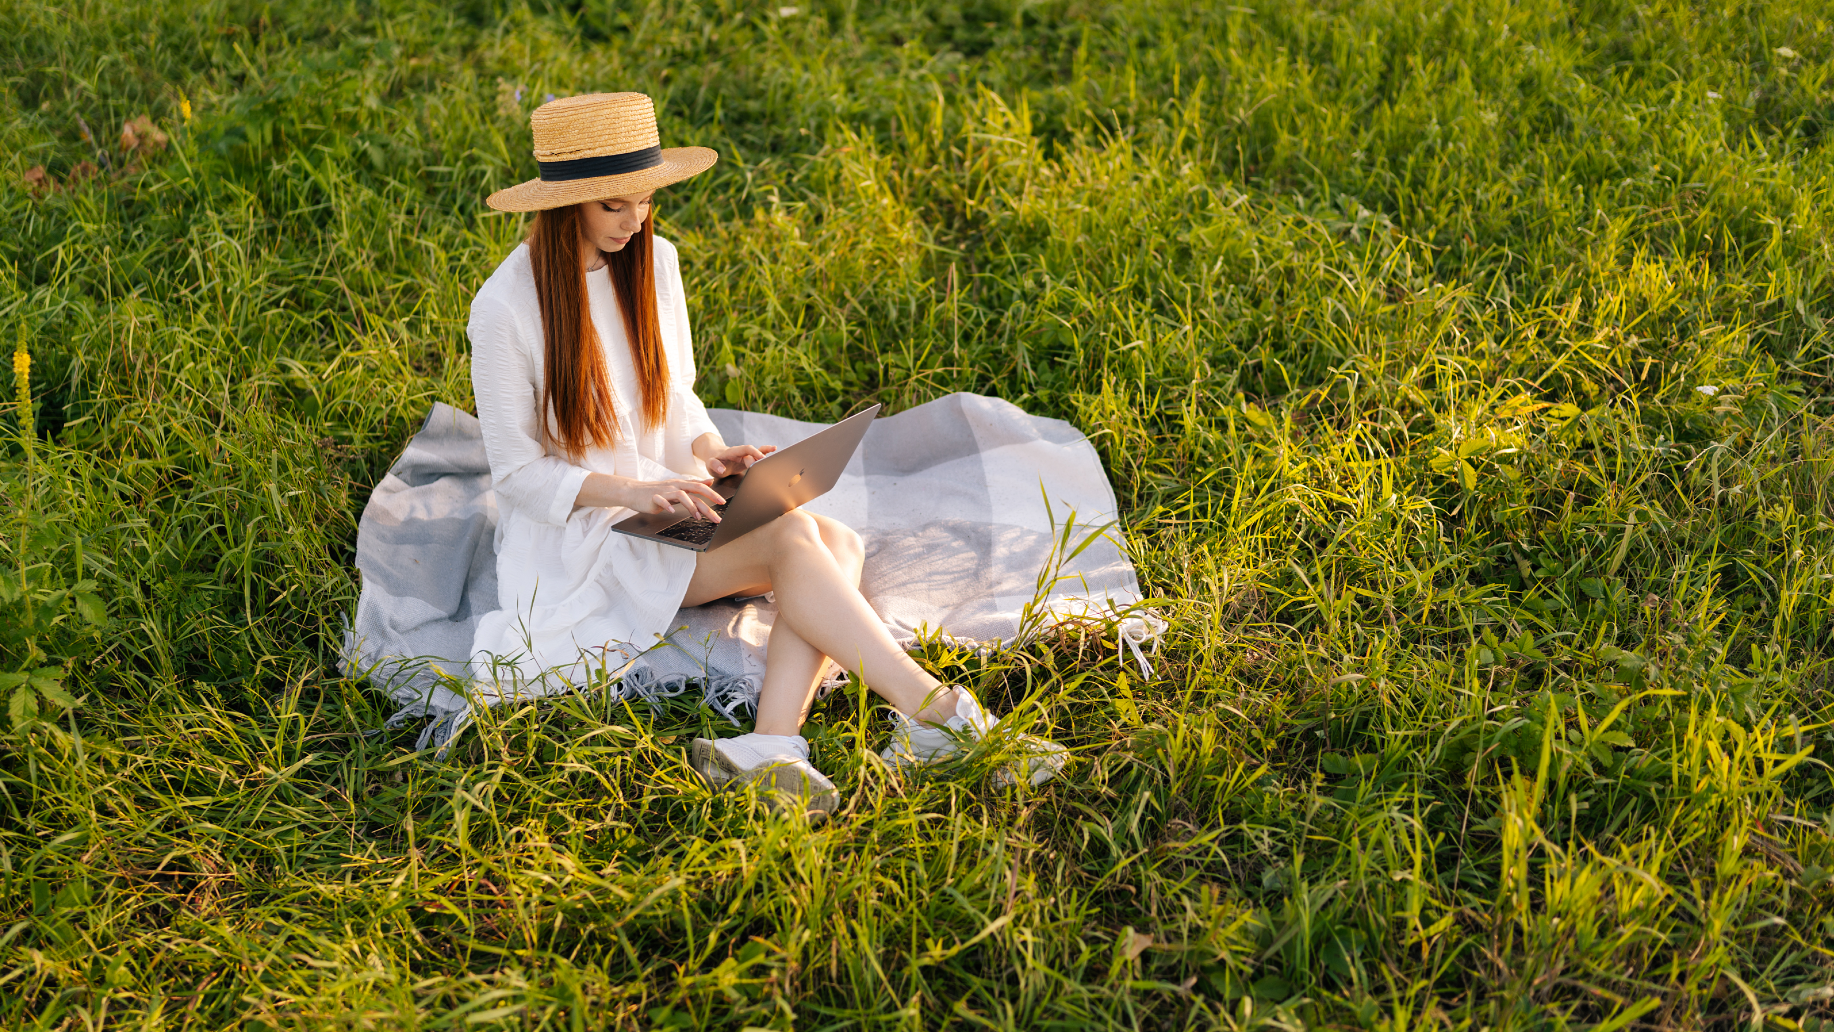 Young woman telelworking in a field